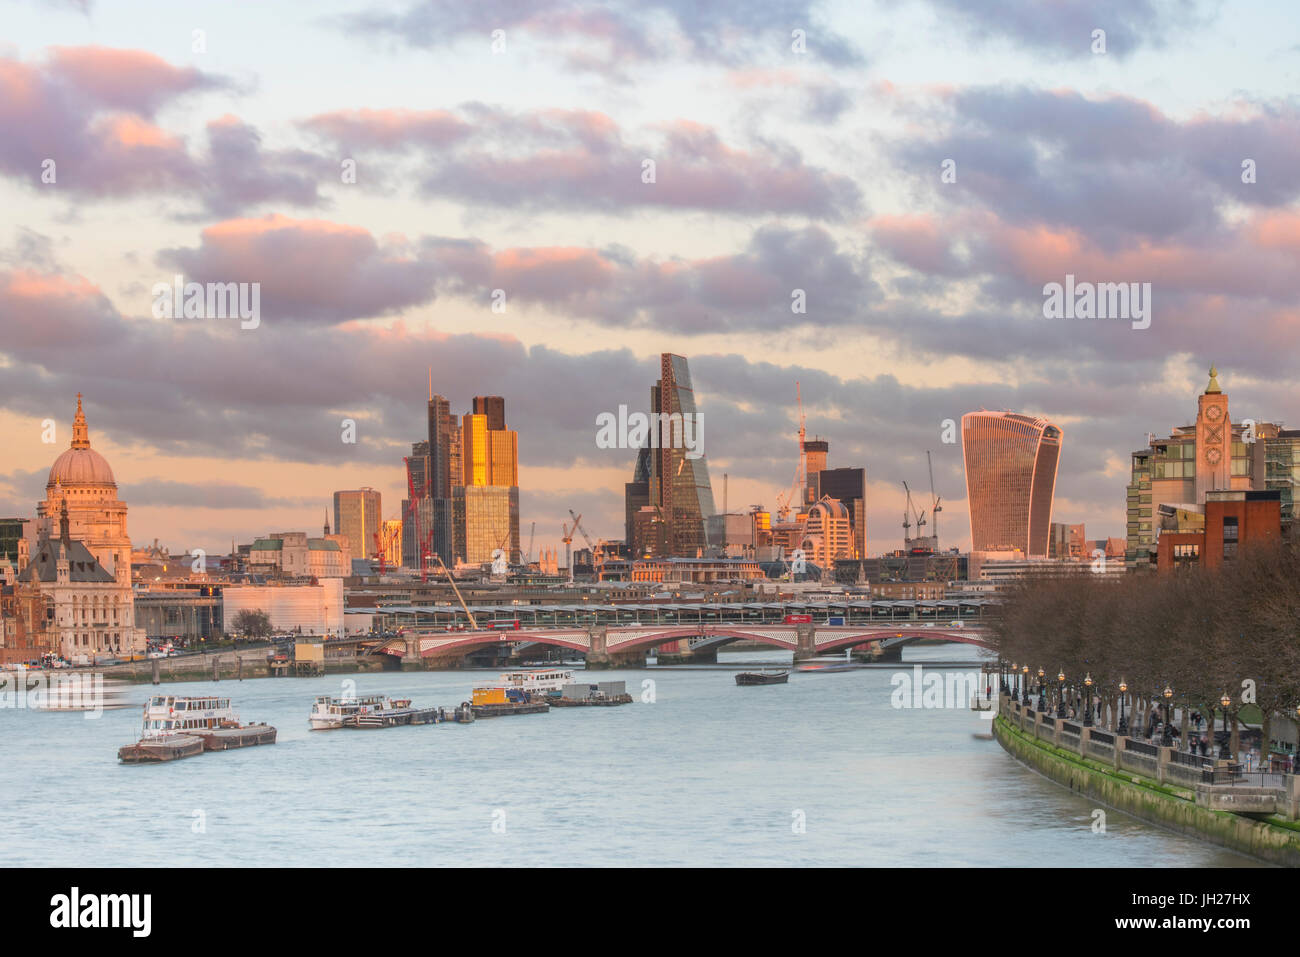 A glow over The City of London at sunset, London, England, United Kingdom, Europe Stock Photo